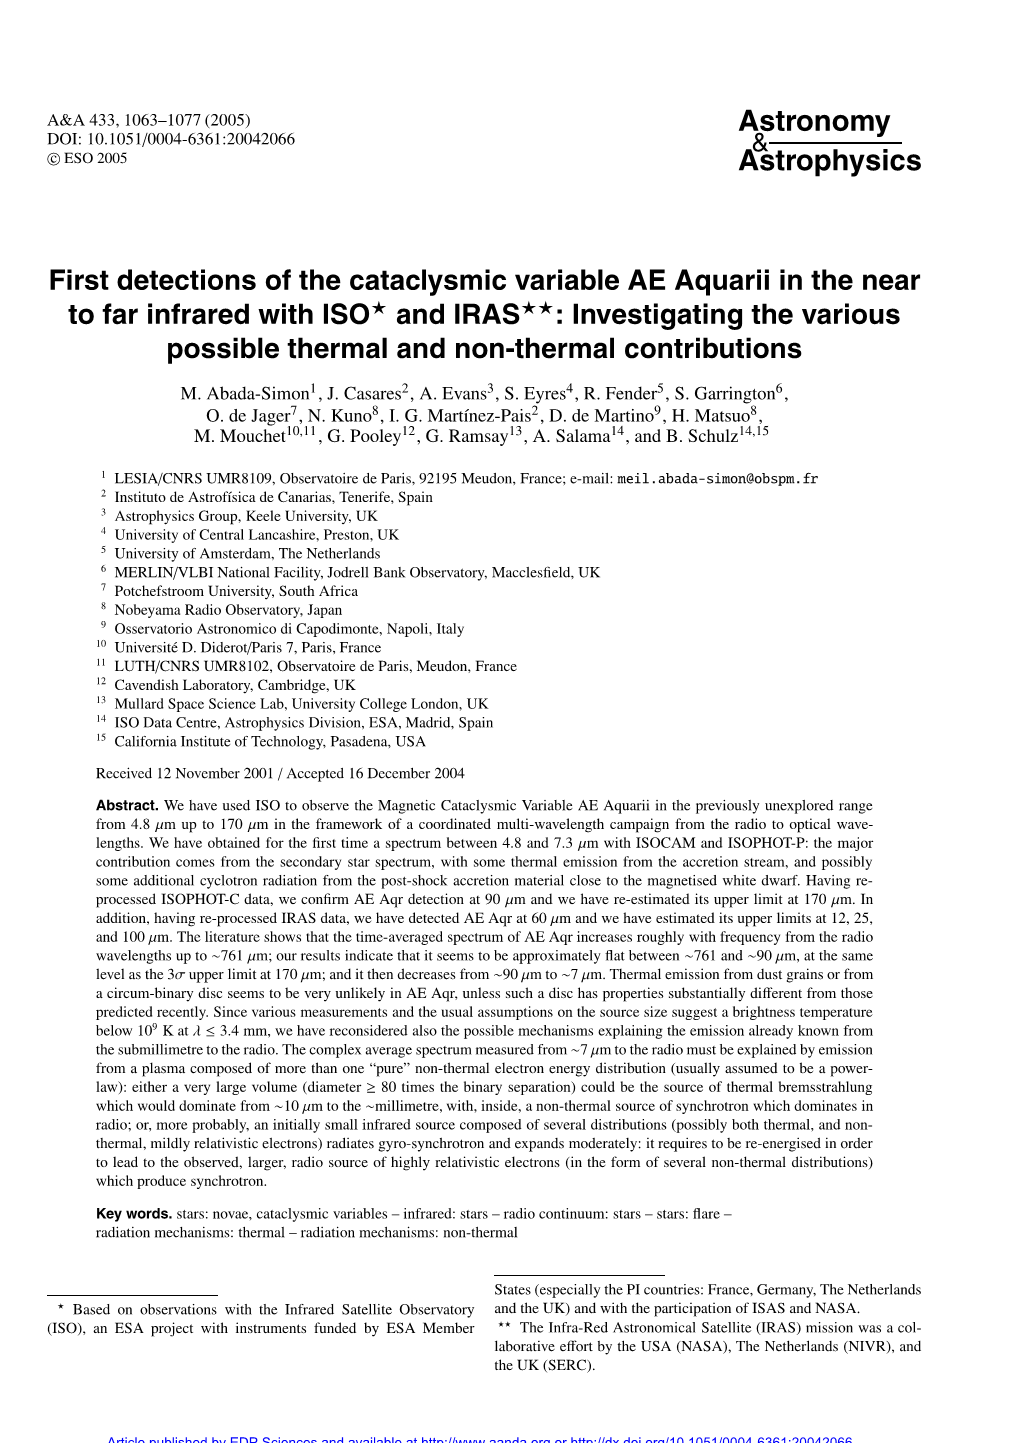 First Detections of the Cataclysmic Variable AE Aquarii in the Near to Far Infrared with ISO and IRAS